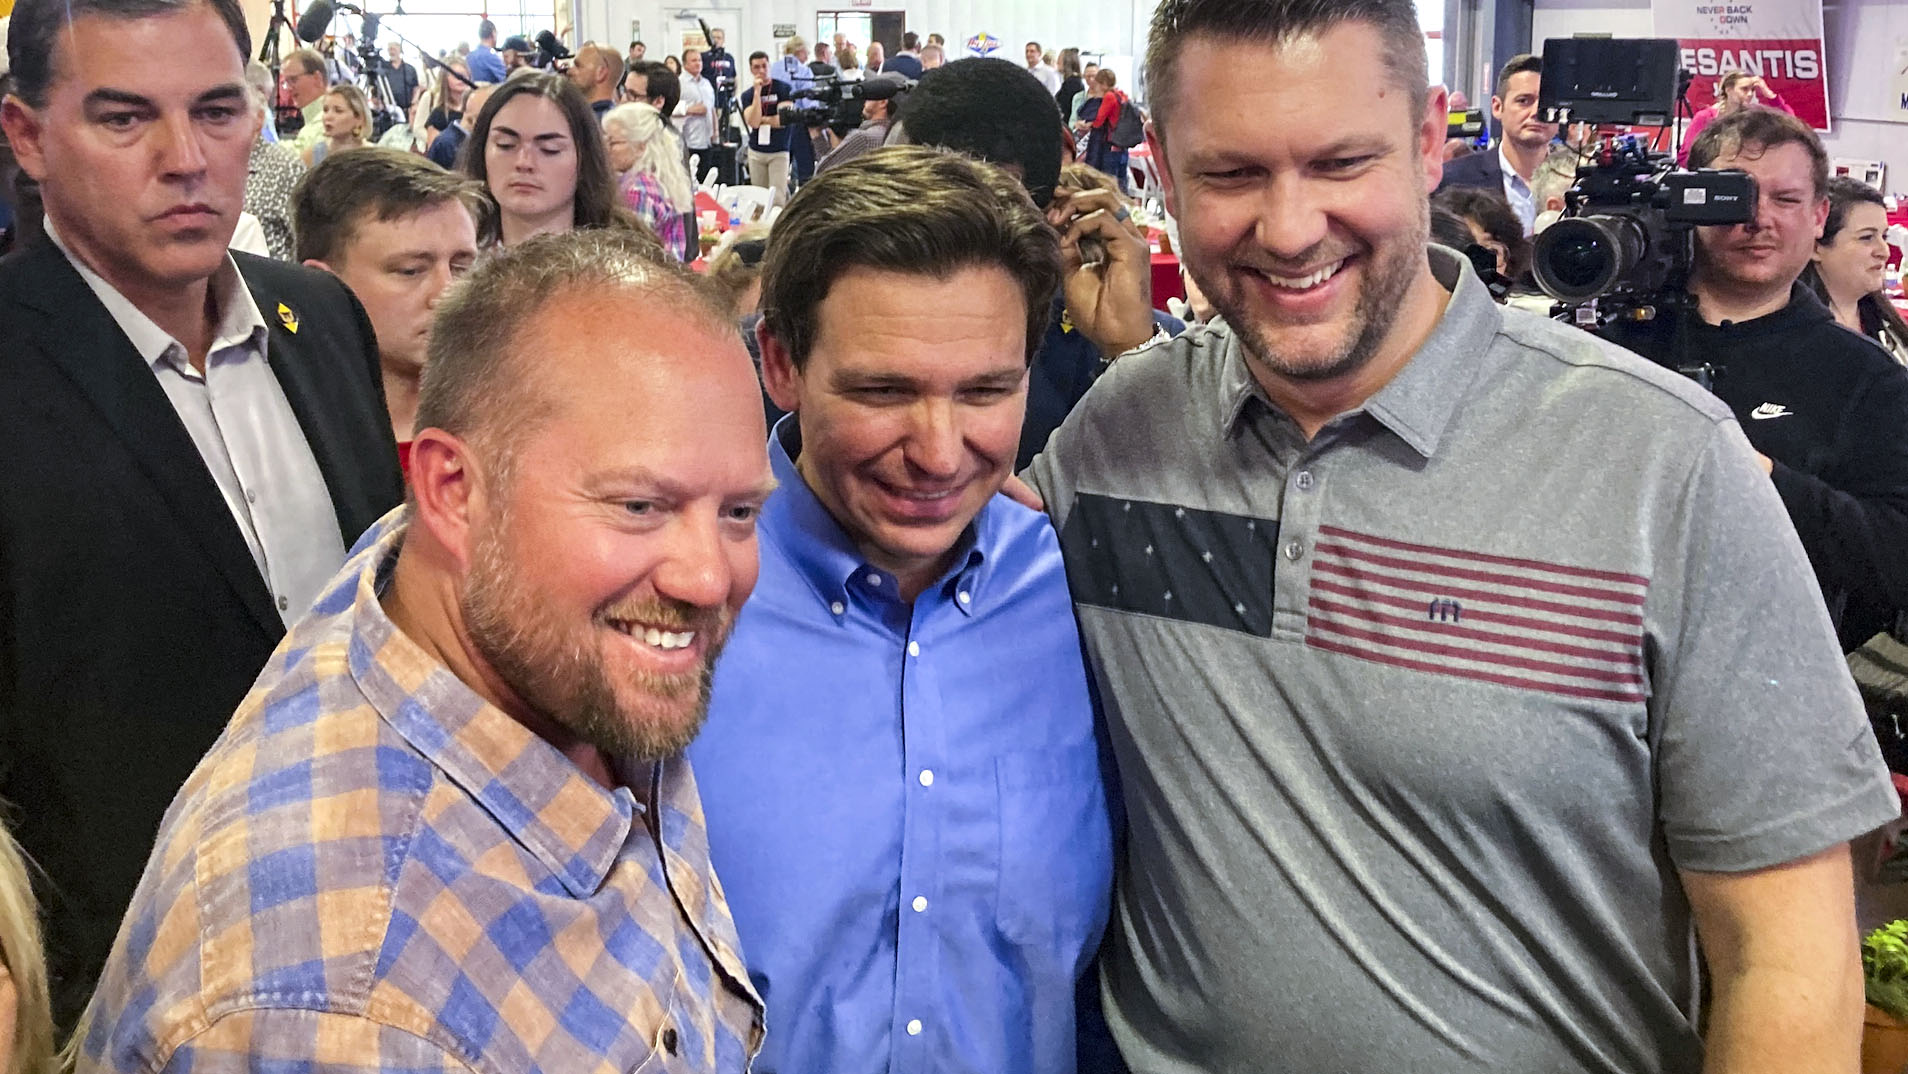 DeSantis meets voters, warns GOP to focus on future or lose 2024.